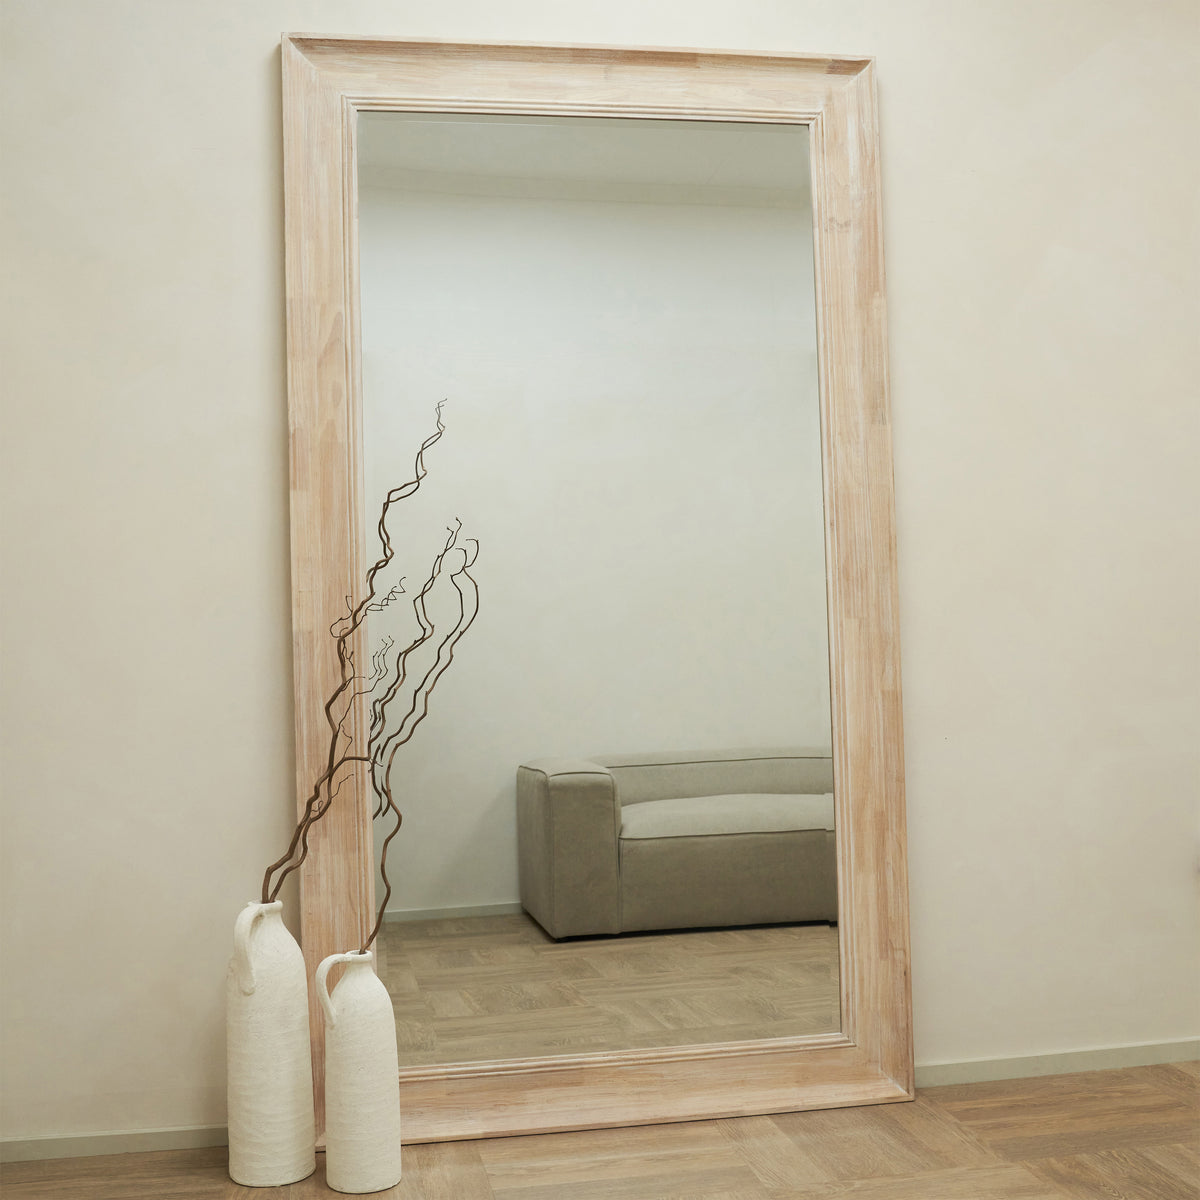 Extra Large Full Length White Washed Wood Mirror leaning against wall